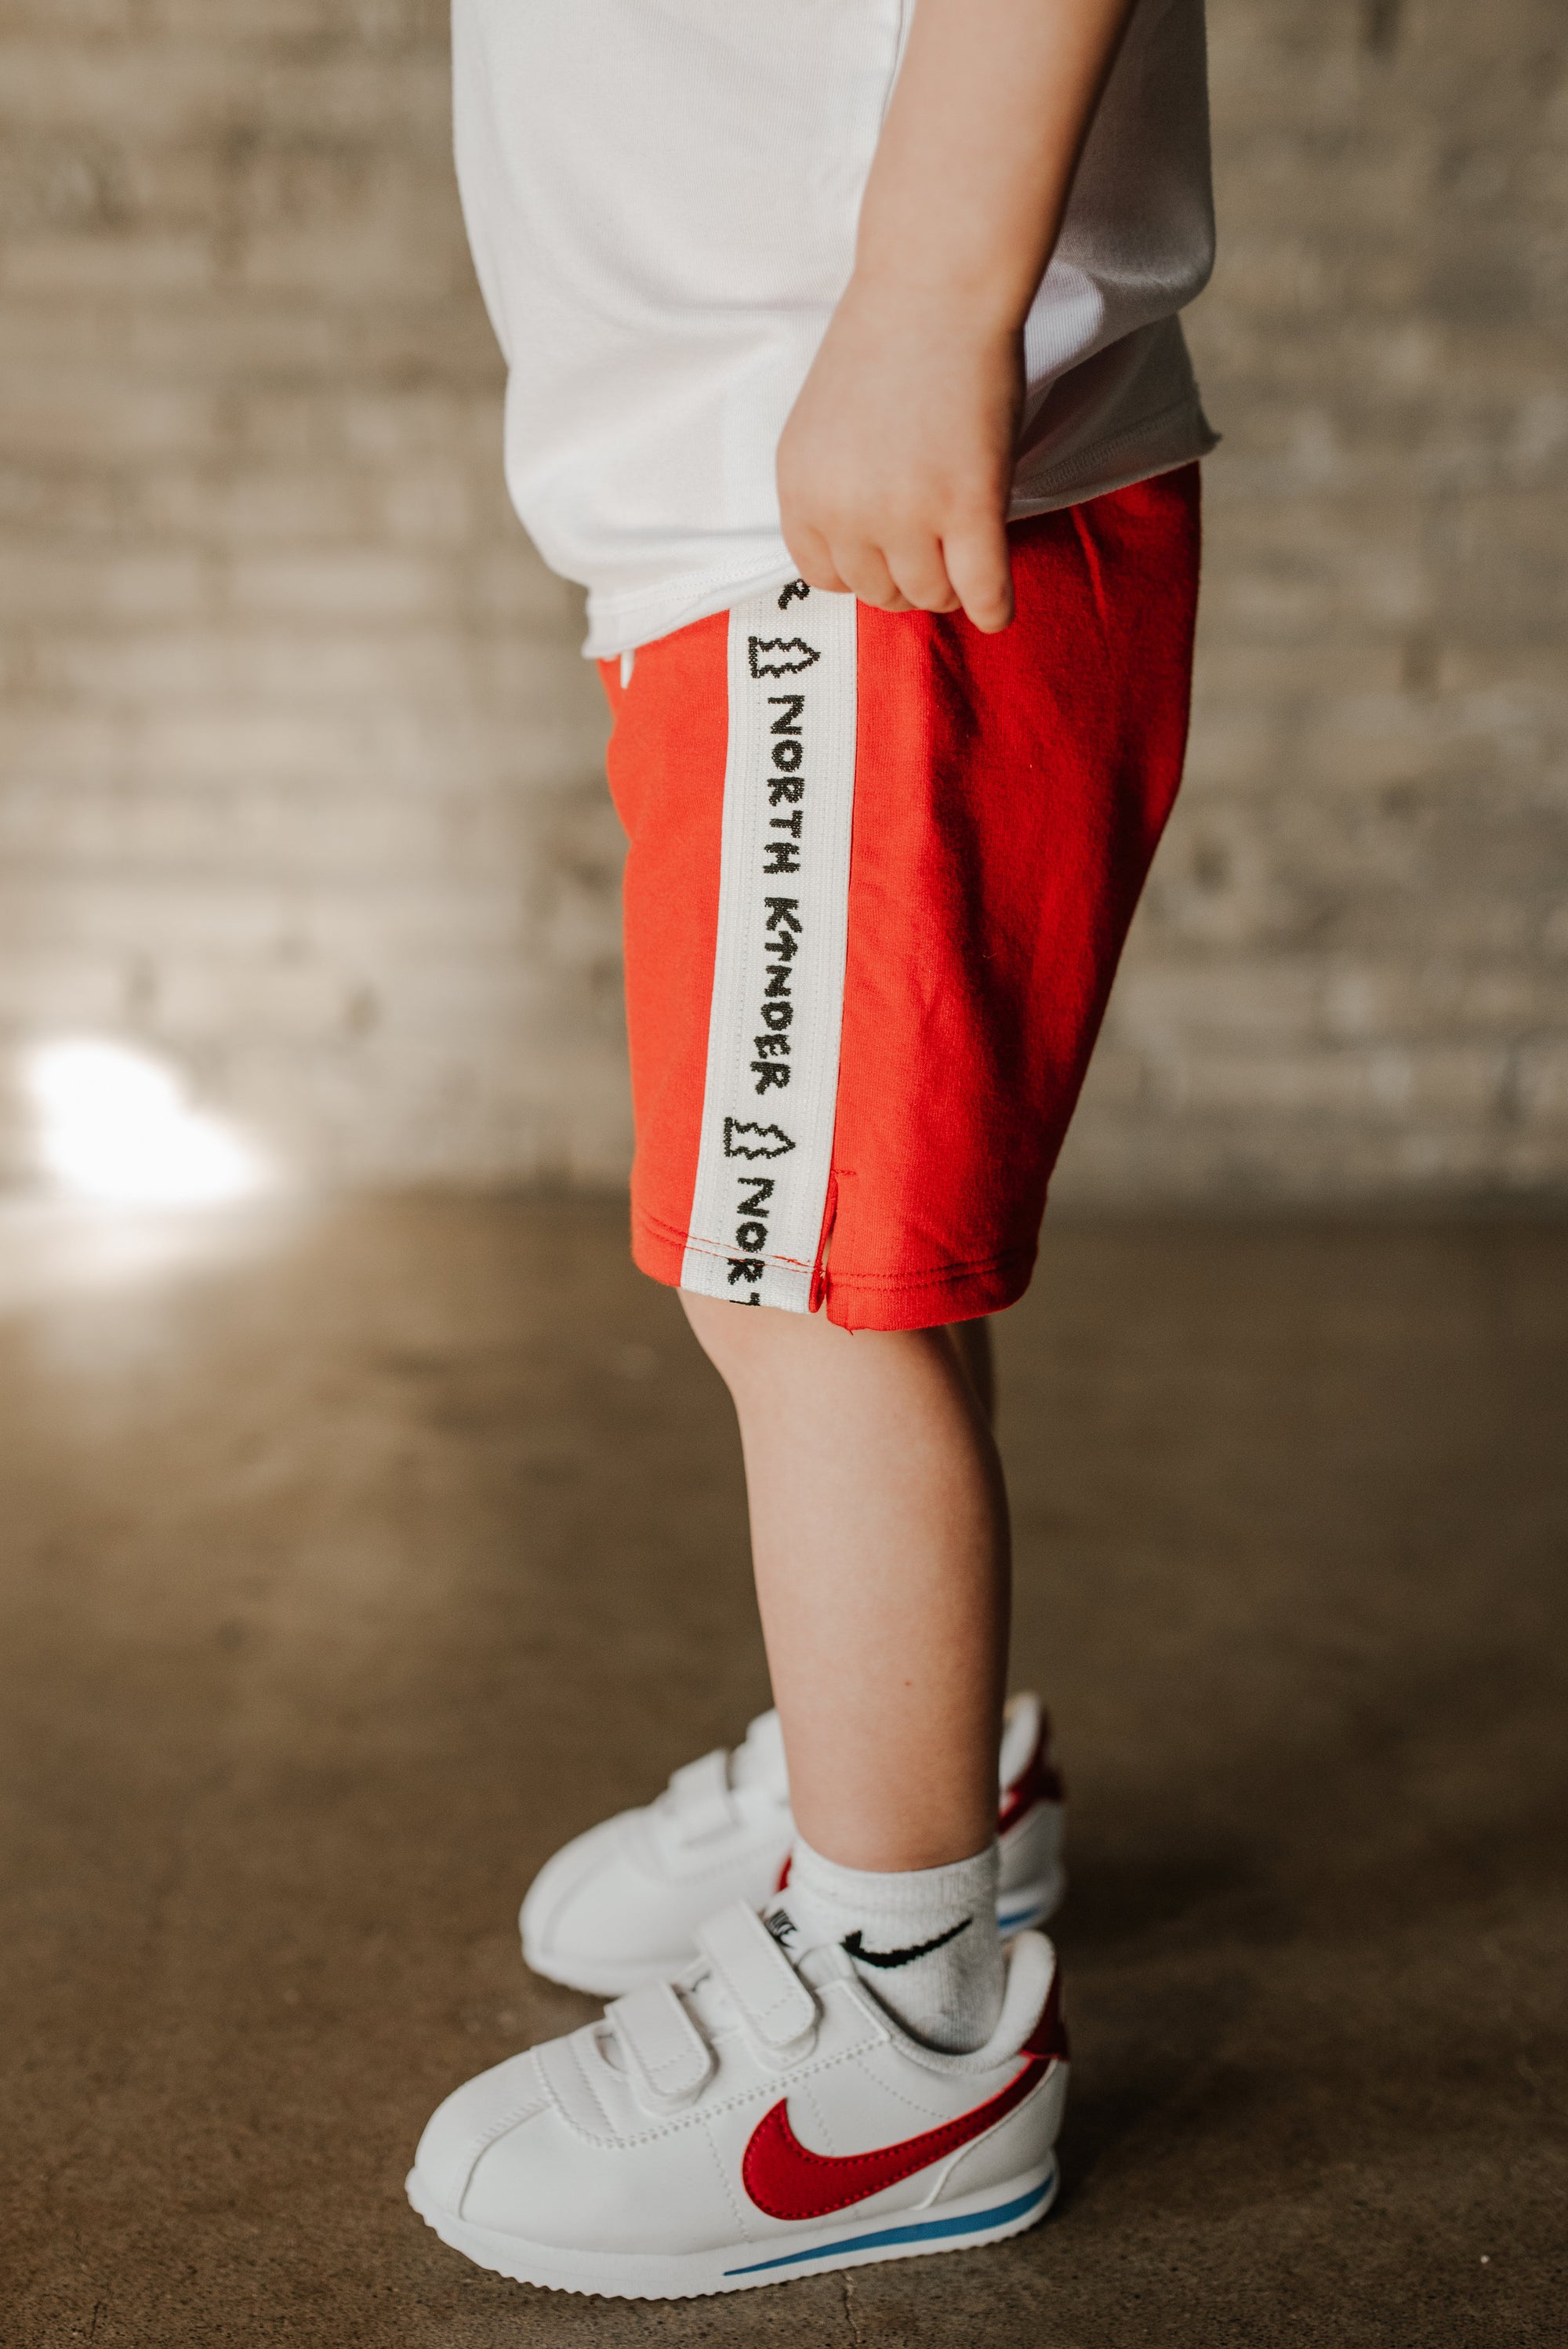 speed shorts - crayon red